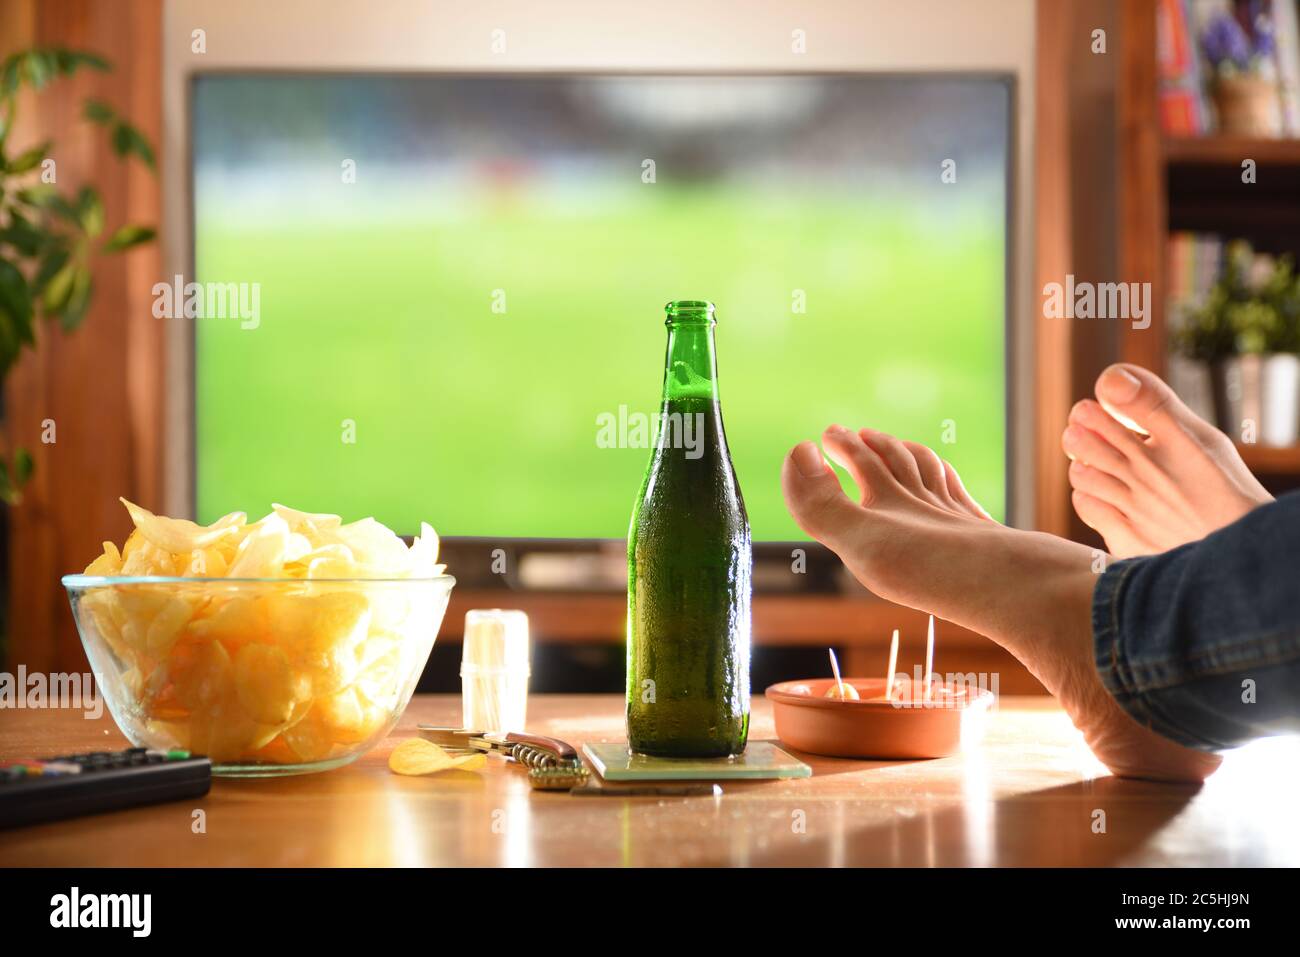 Man at home watching game on television with feet on side table and snack. Stock Photo